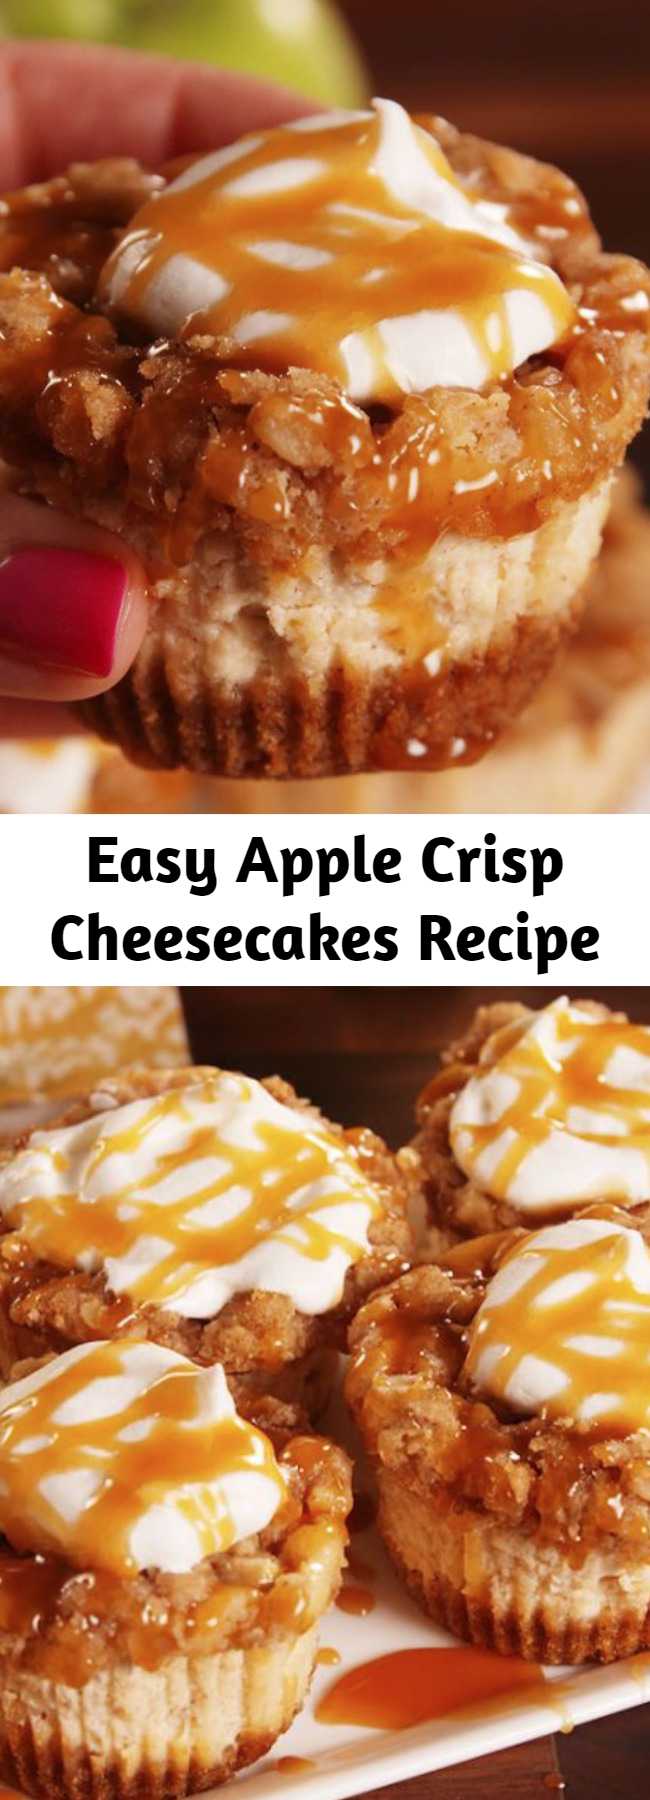 Easy Apple Crisp Cheesecakes Recipe - To have cheesecake faster try these Mini Apple Cheesecakes. You won't be able to eat just one.